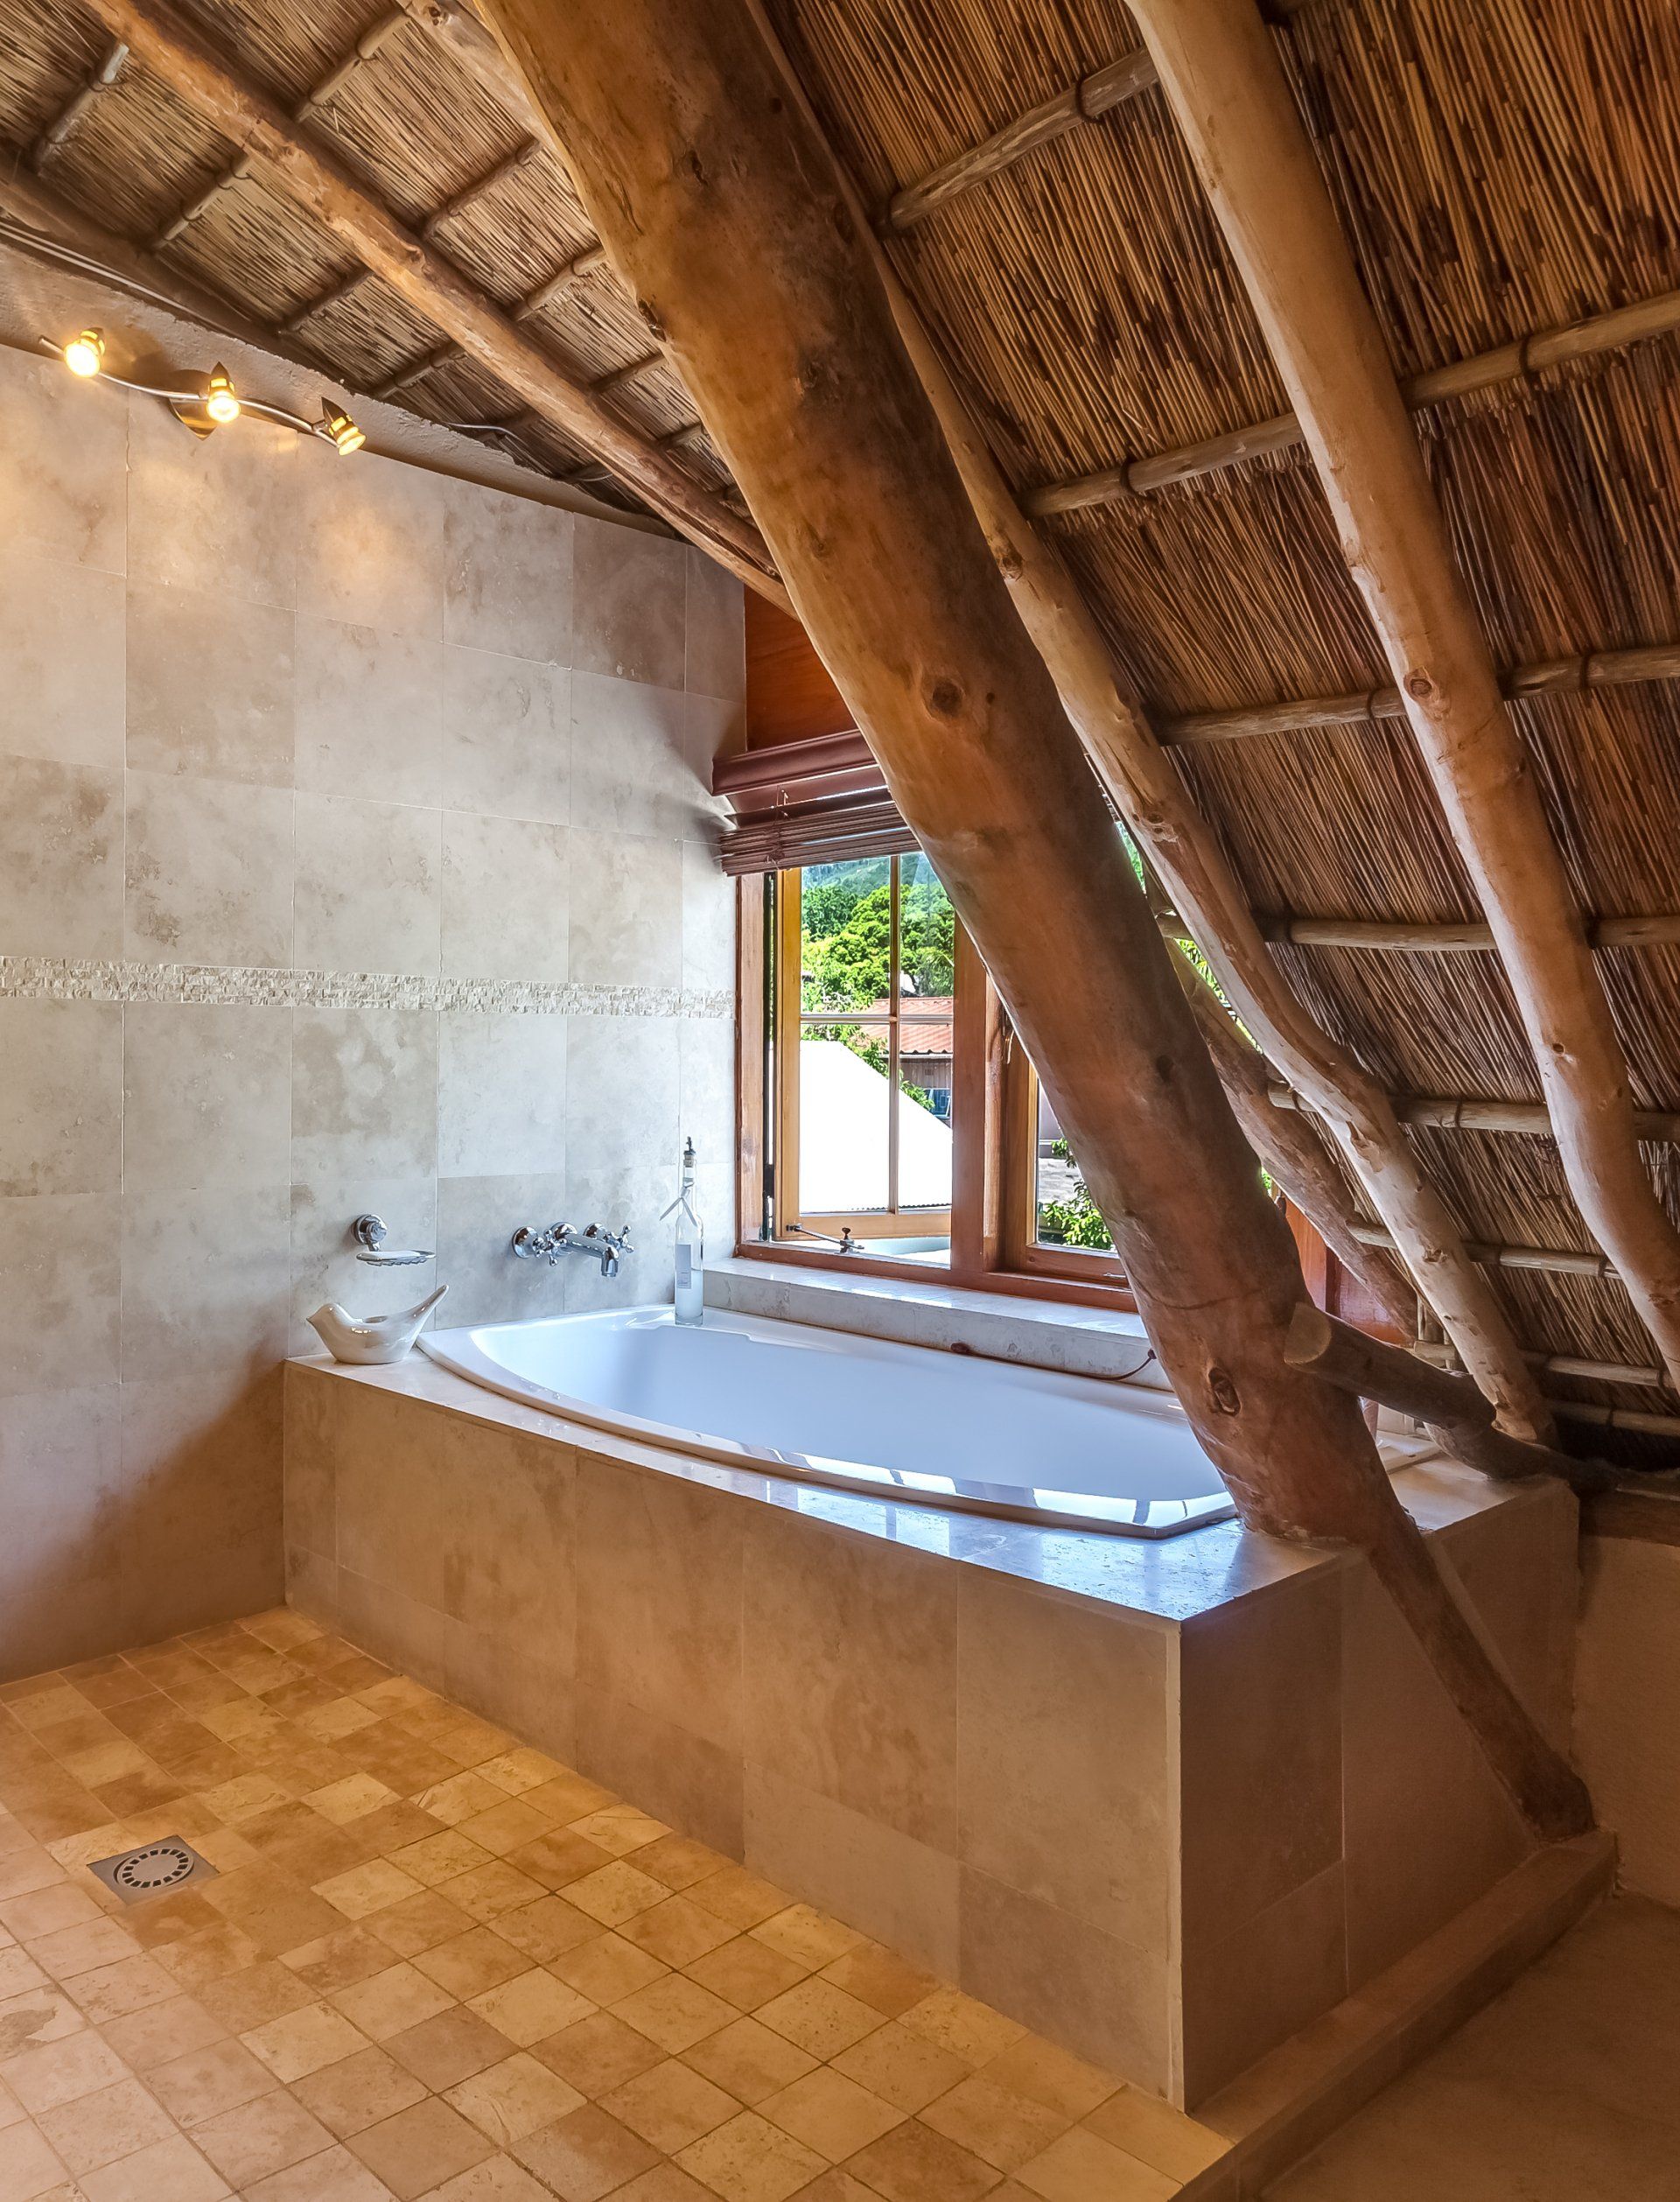 a Ft. Lauderdale bathroom remodel with a thatched roof and a bathtub: Bathroom Remodel Quote Fort Lauderdale